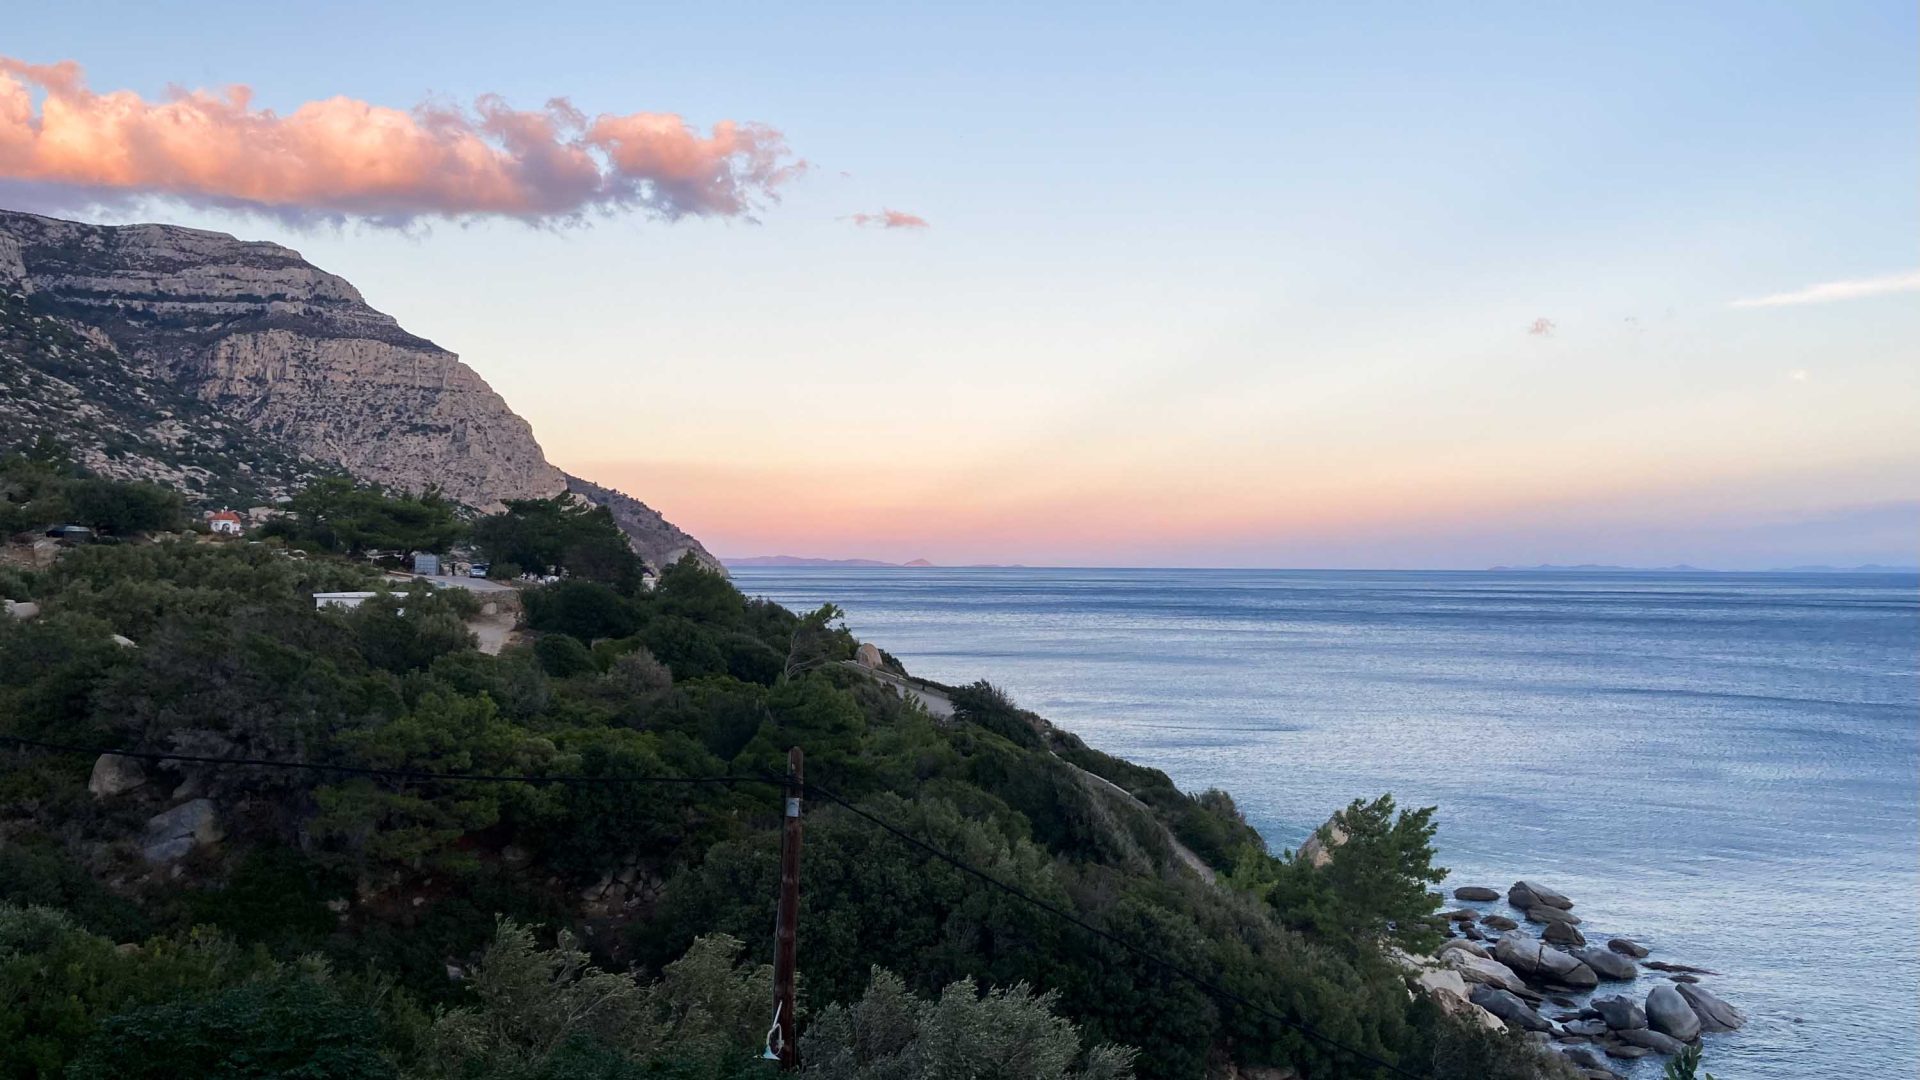 How to live well (and long) according to the Greek island of Ikaria